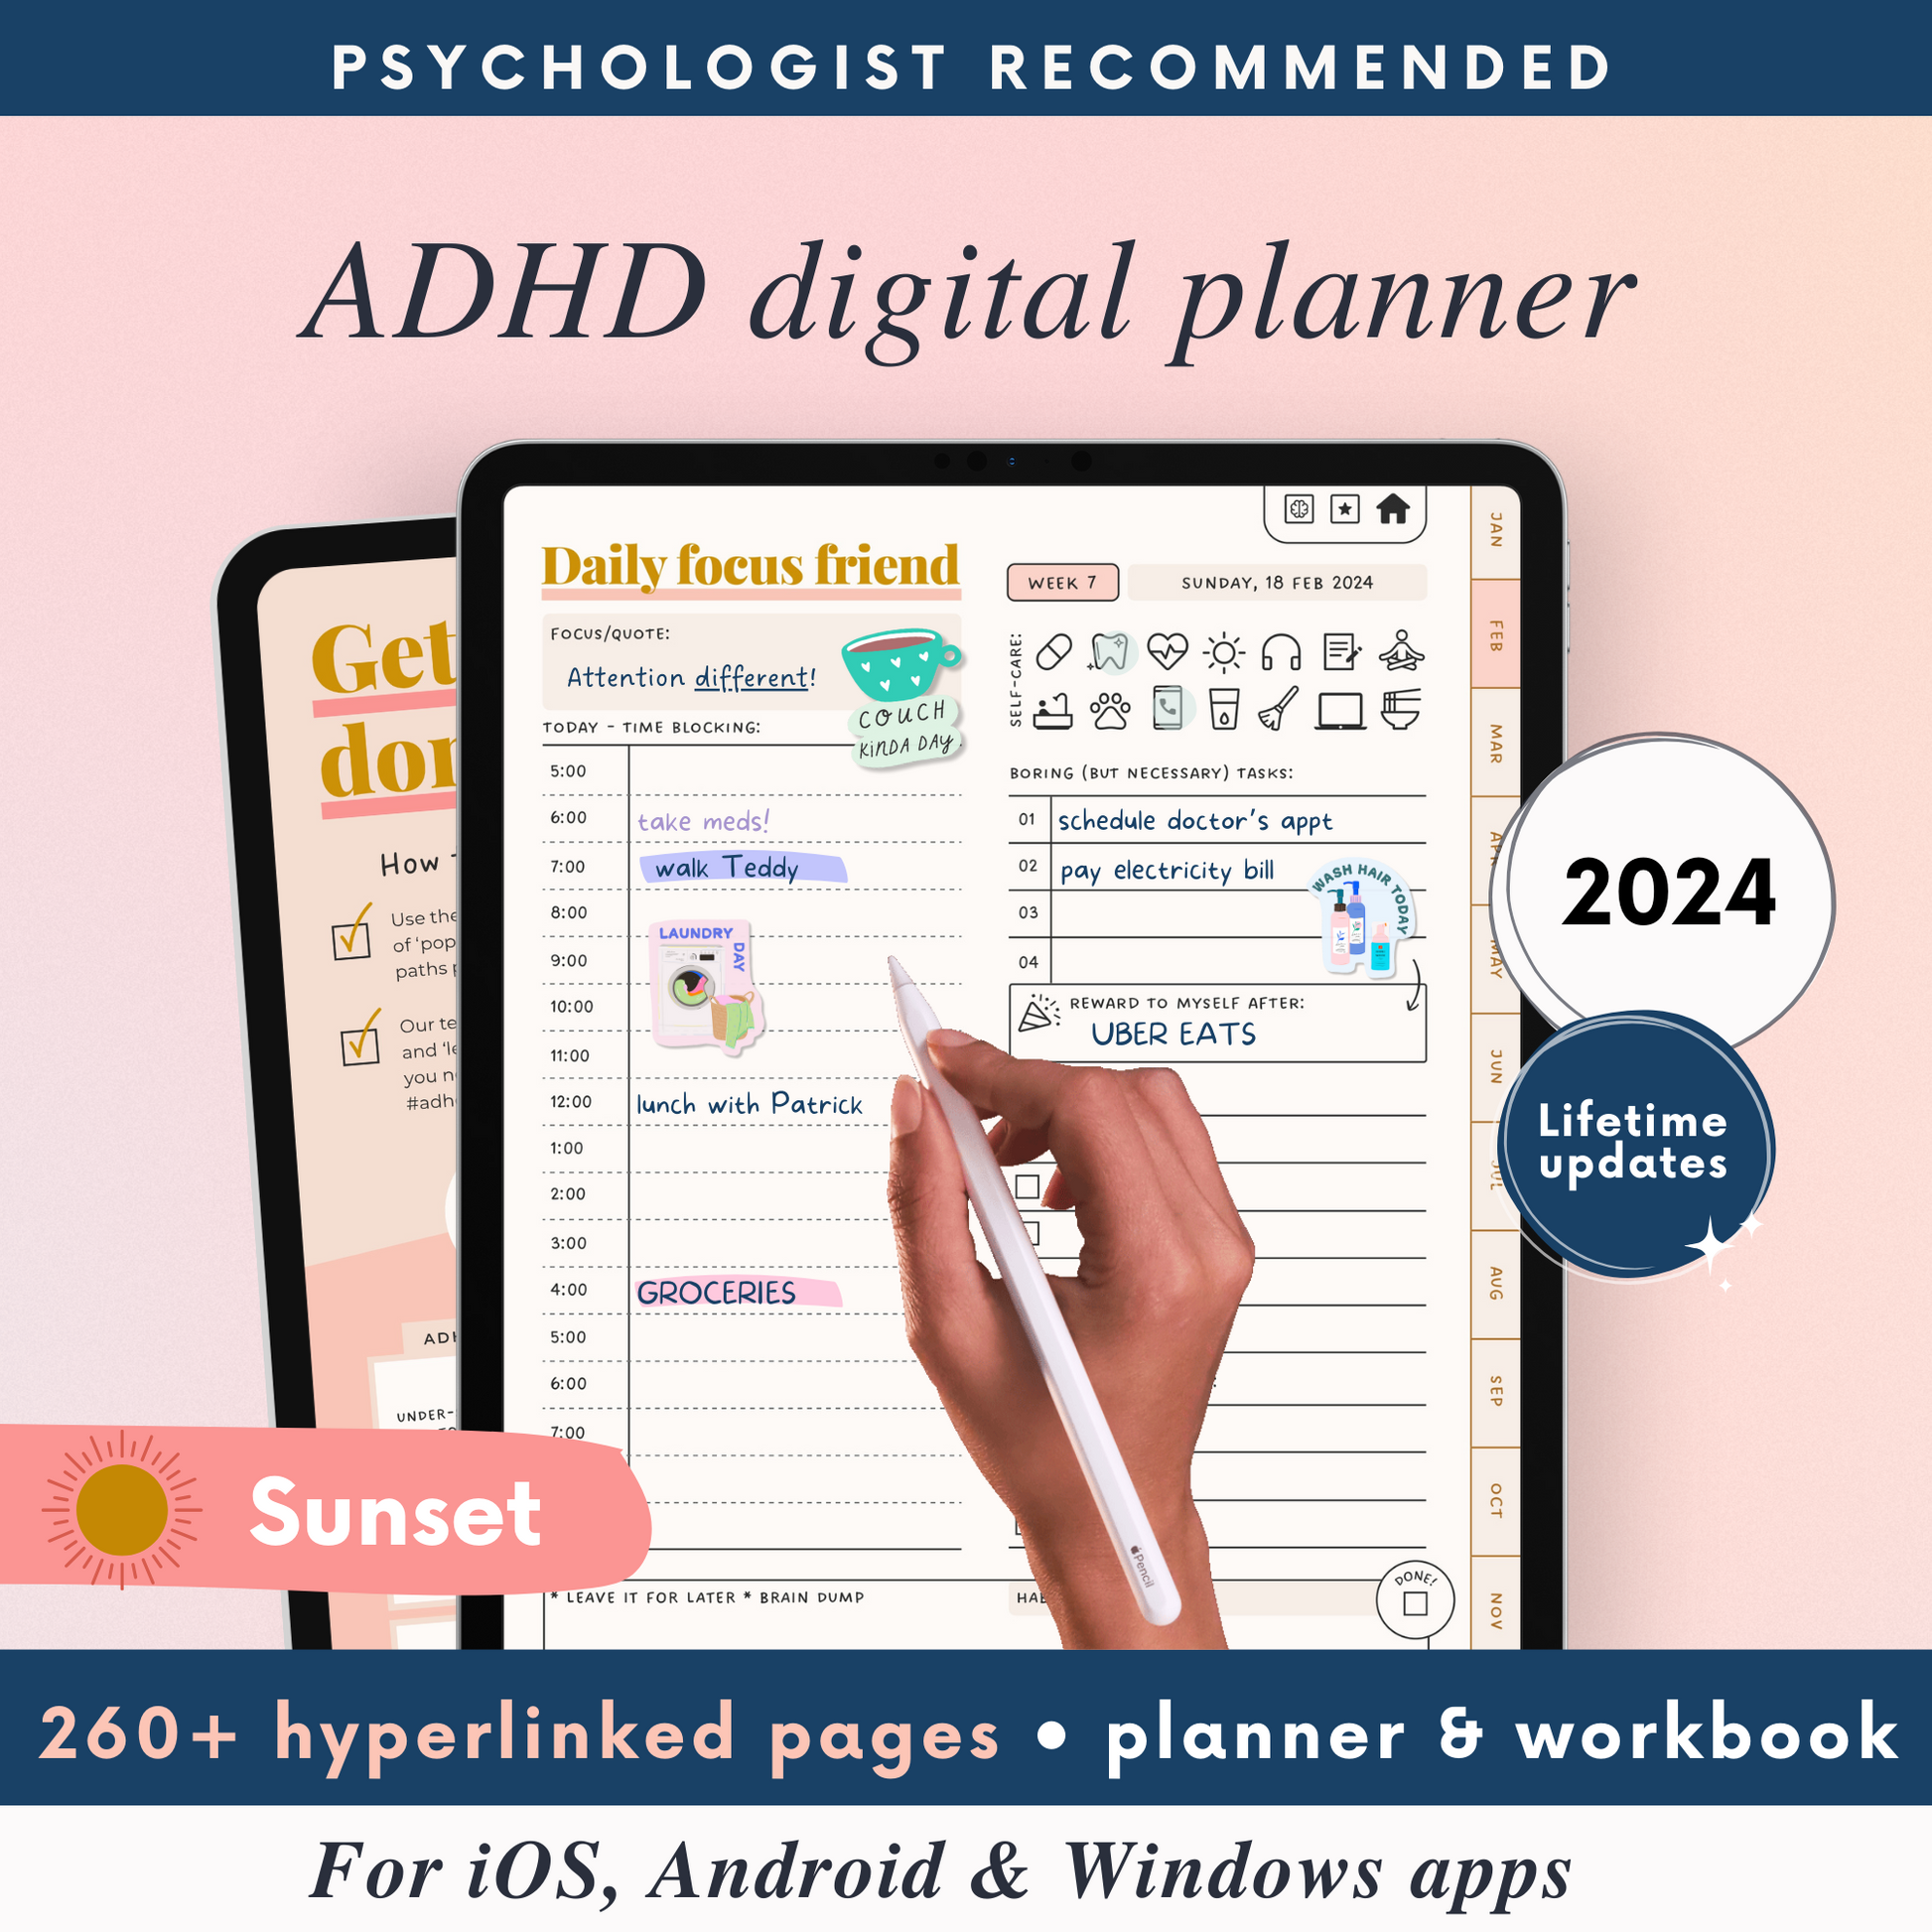 Sunset ADHD Digital Planner for iOS, Android & Windows Apps